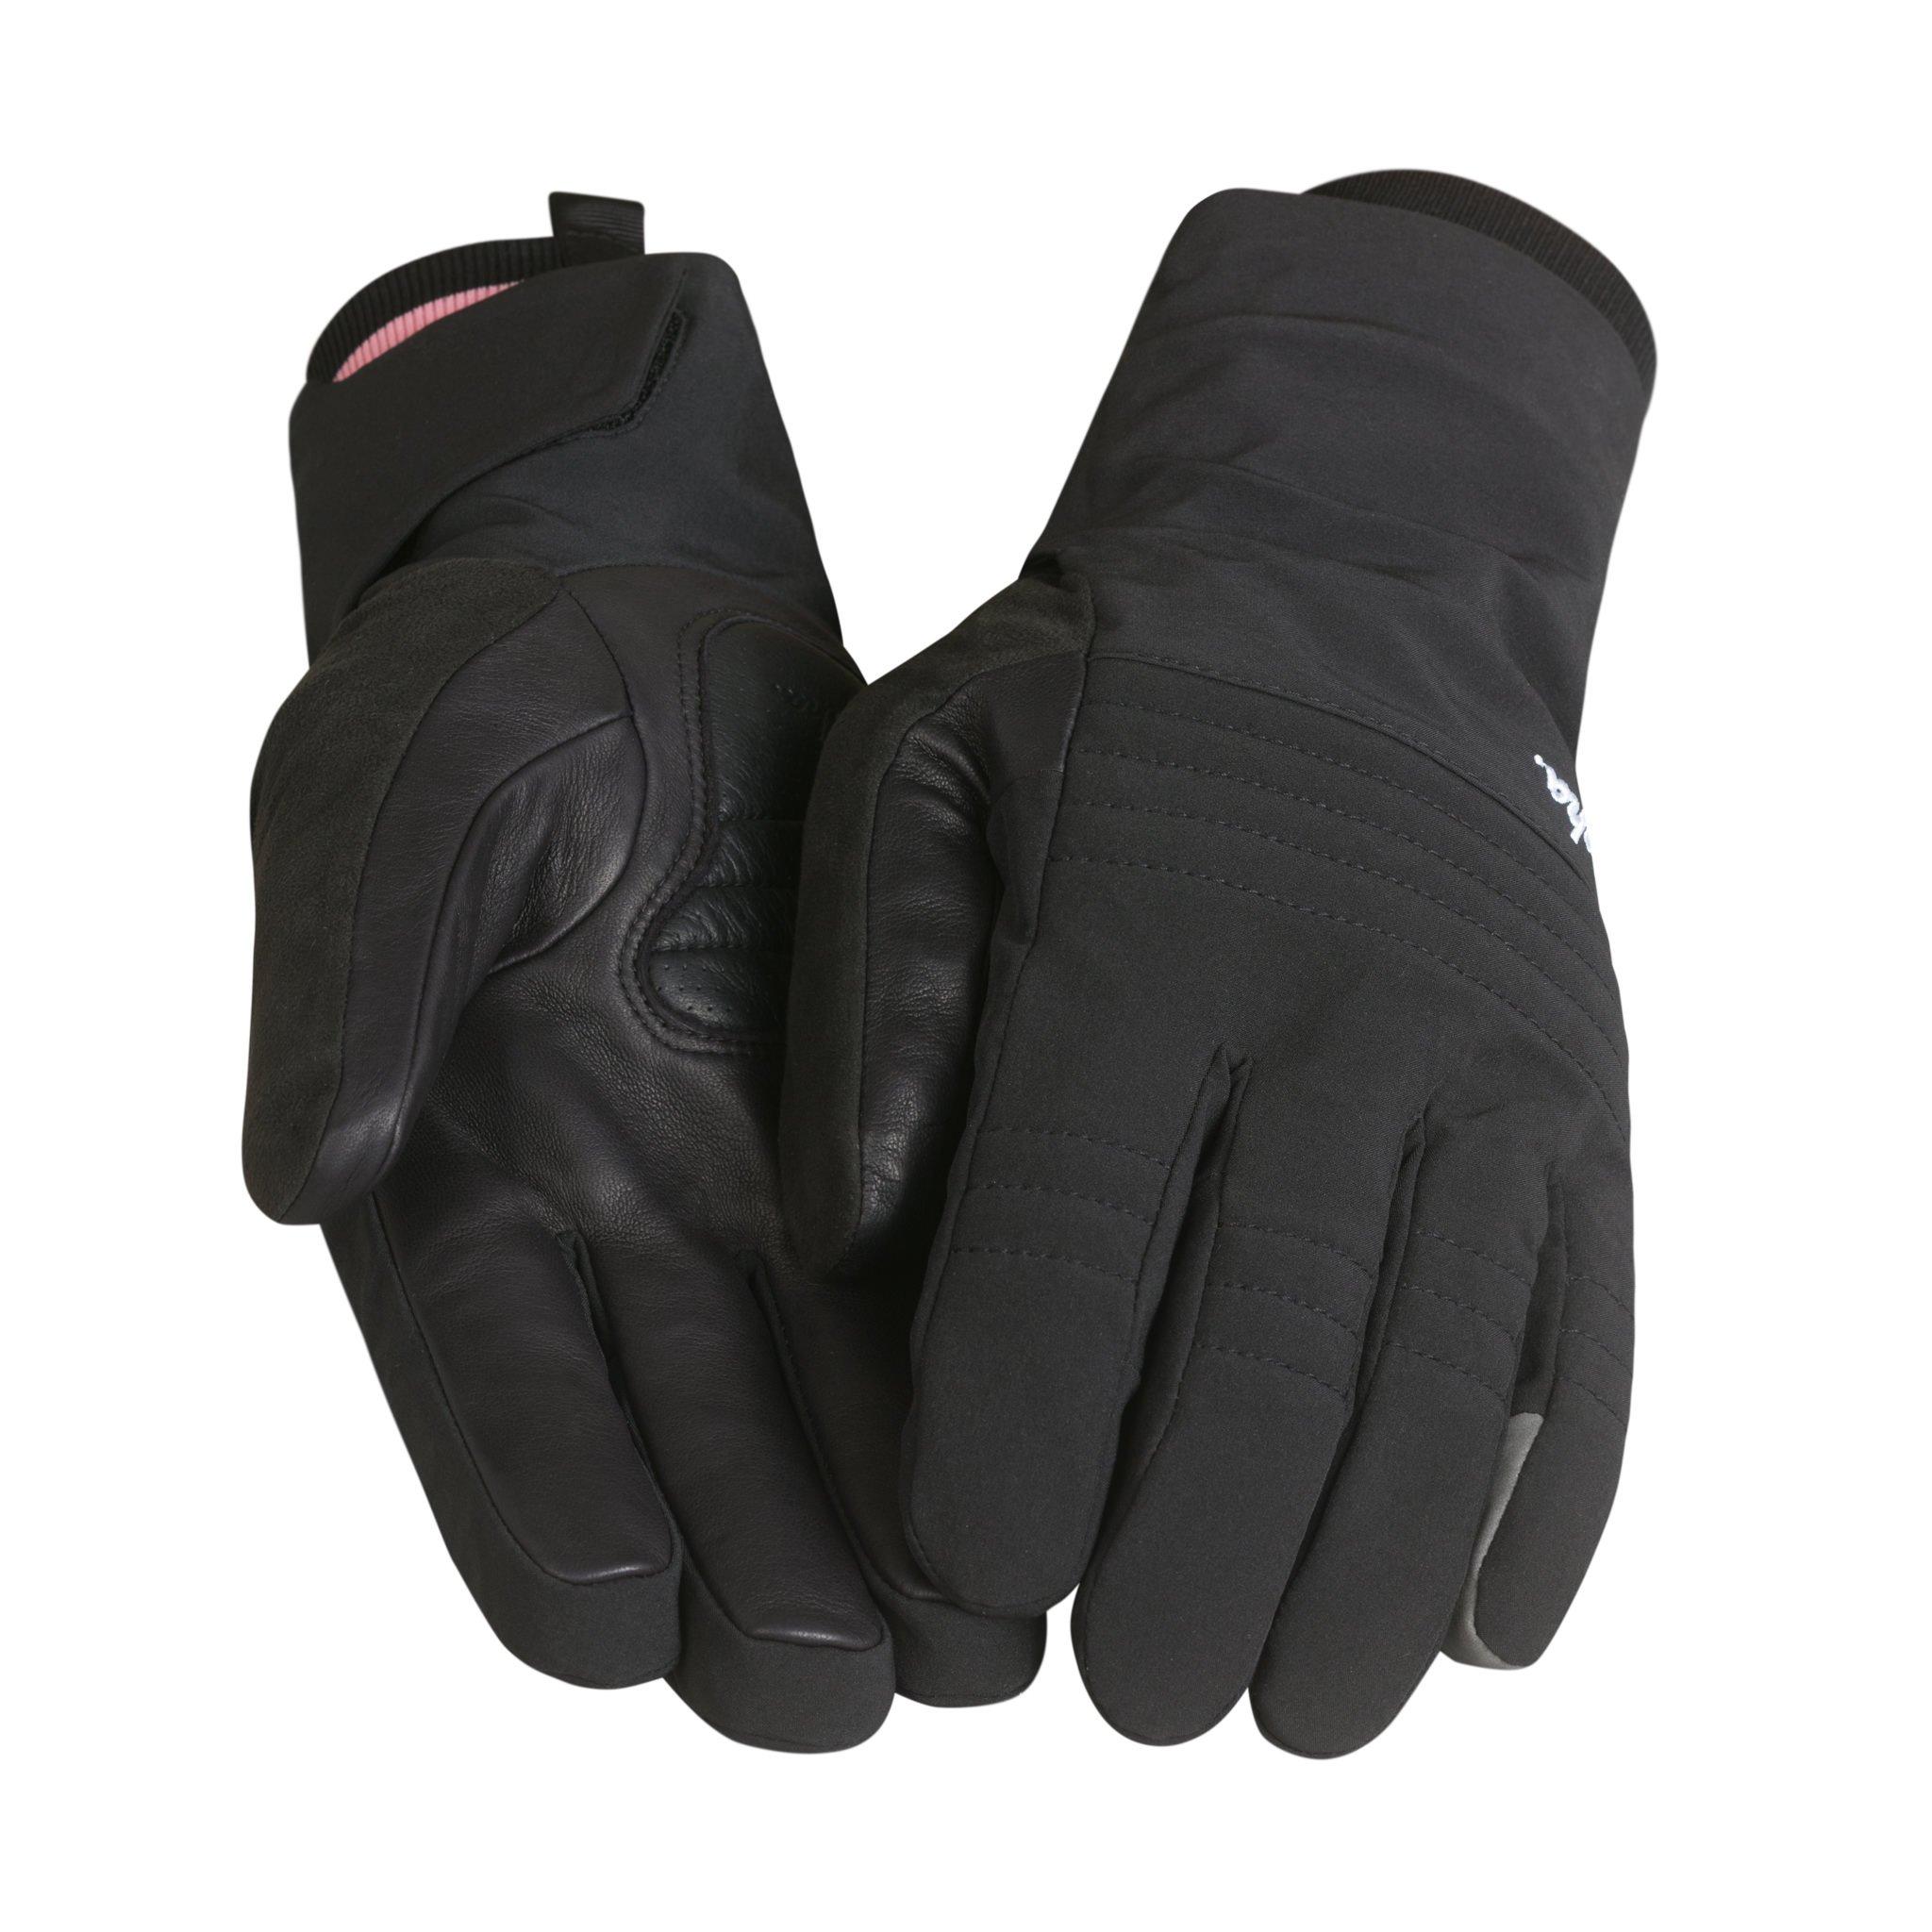 Rapha Winter Gloves for cold weather cycling – Quick & Precise Gear Reviews